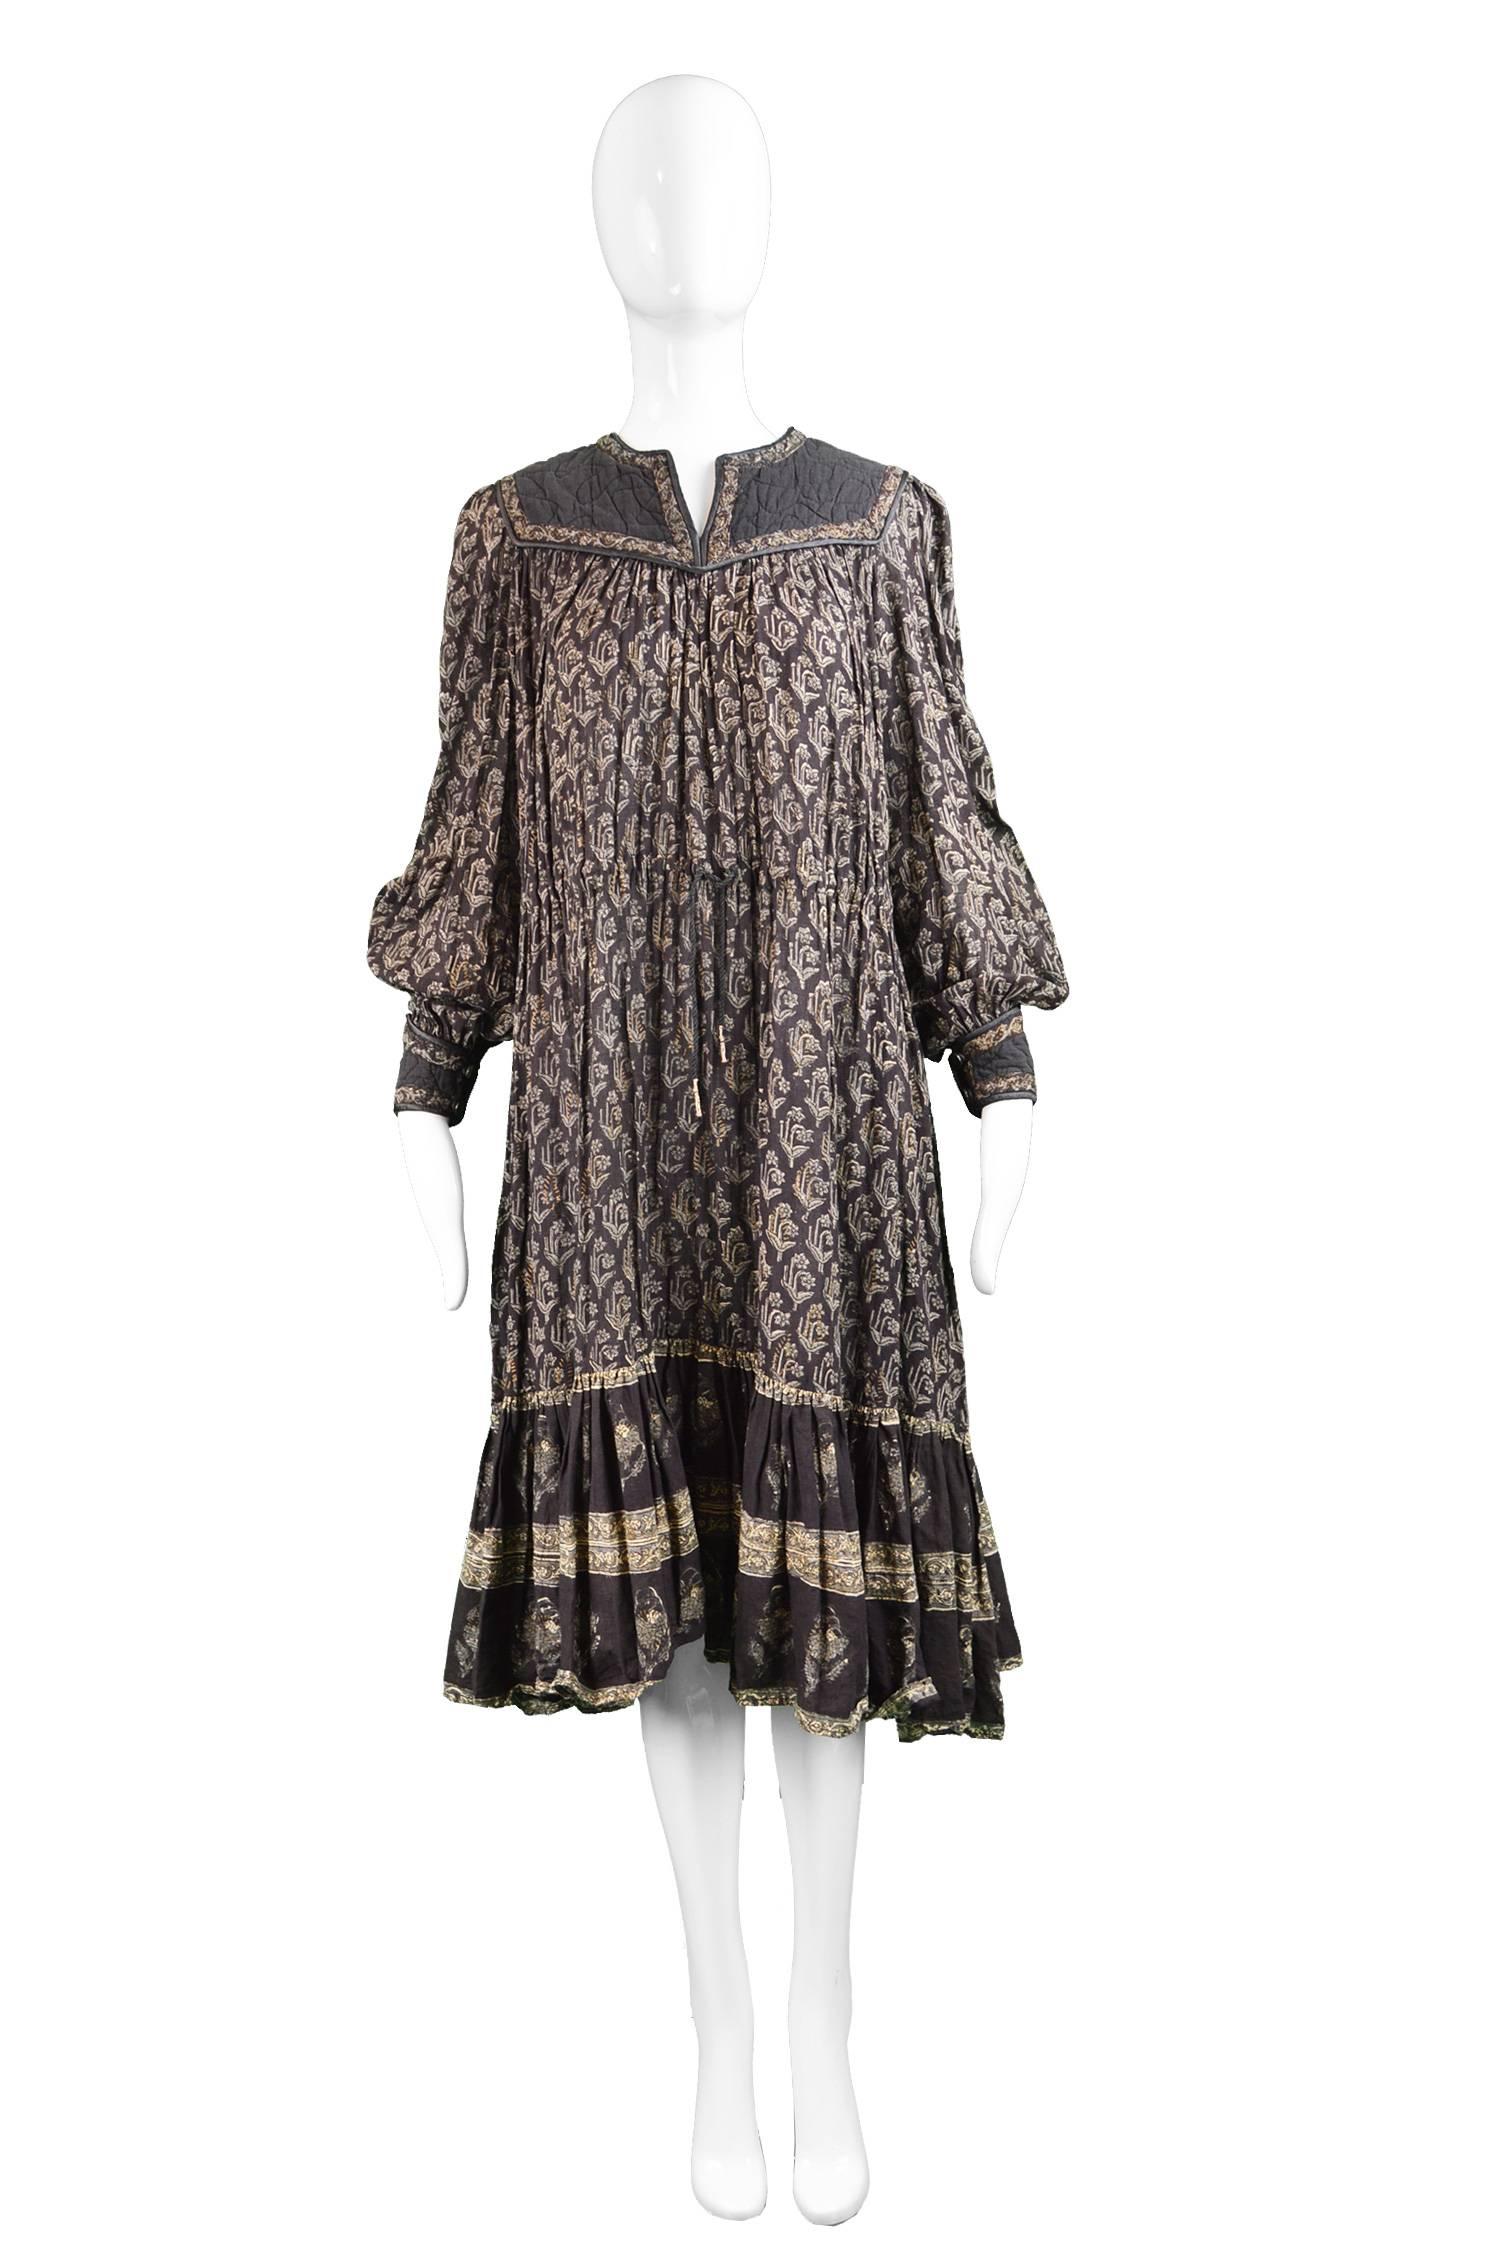 Phool Vintage Indian Cotton Smock Floral Block Print & Gold Paint Dress, 1970s

Estimated Size: Best fits a women's Small to Medium due to loose, smock fit. 
Bust - up to 40” / 101cm due to loose, smock style fit
Waist - Up to 38” / 96cm (can be